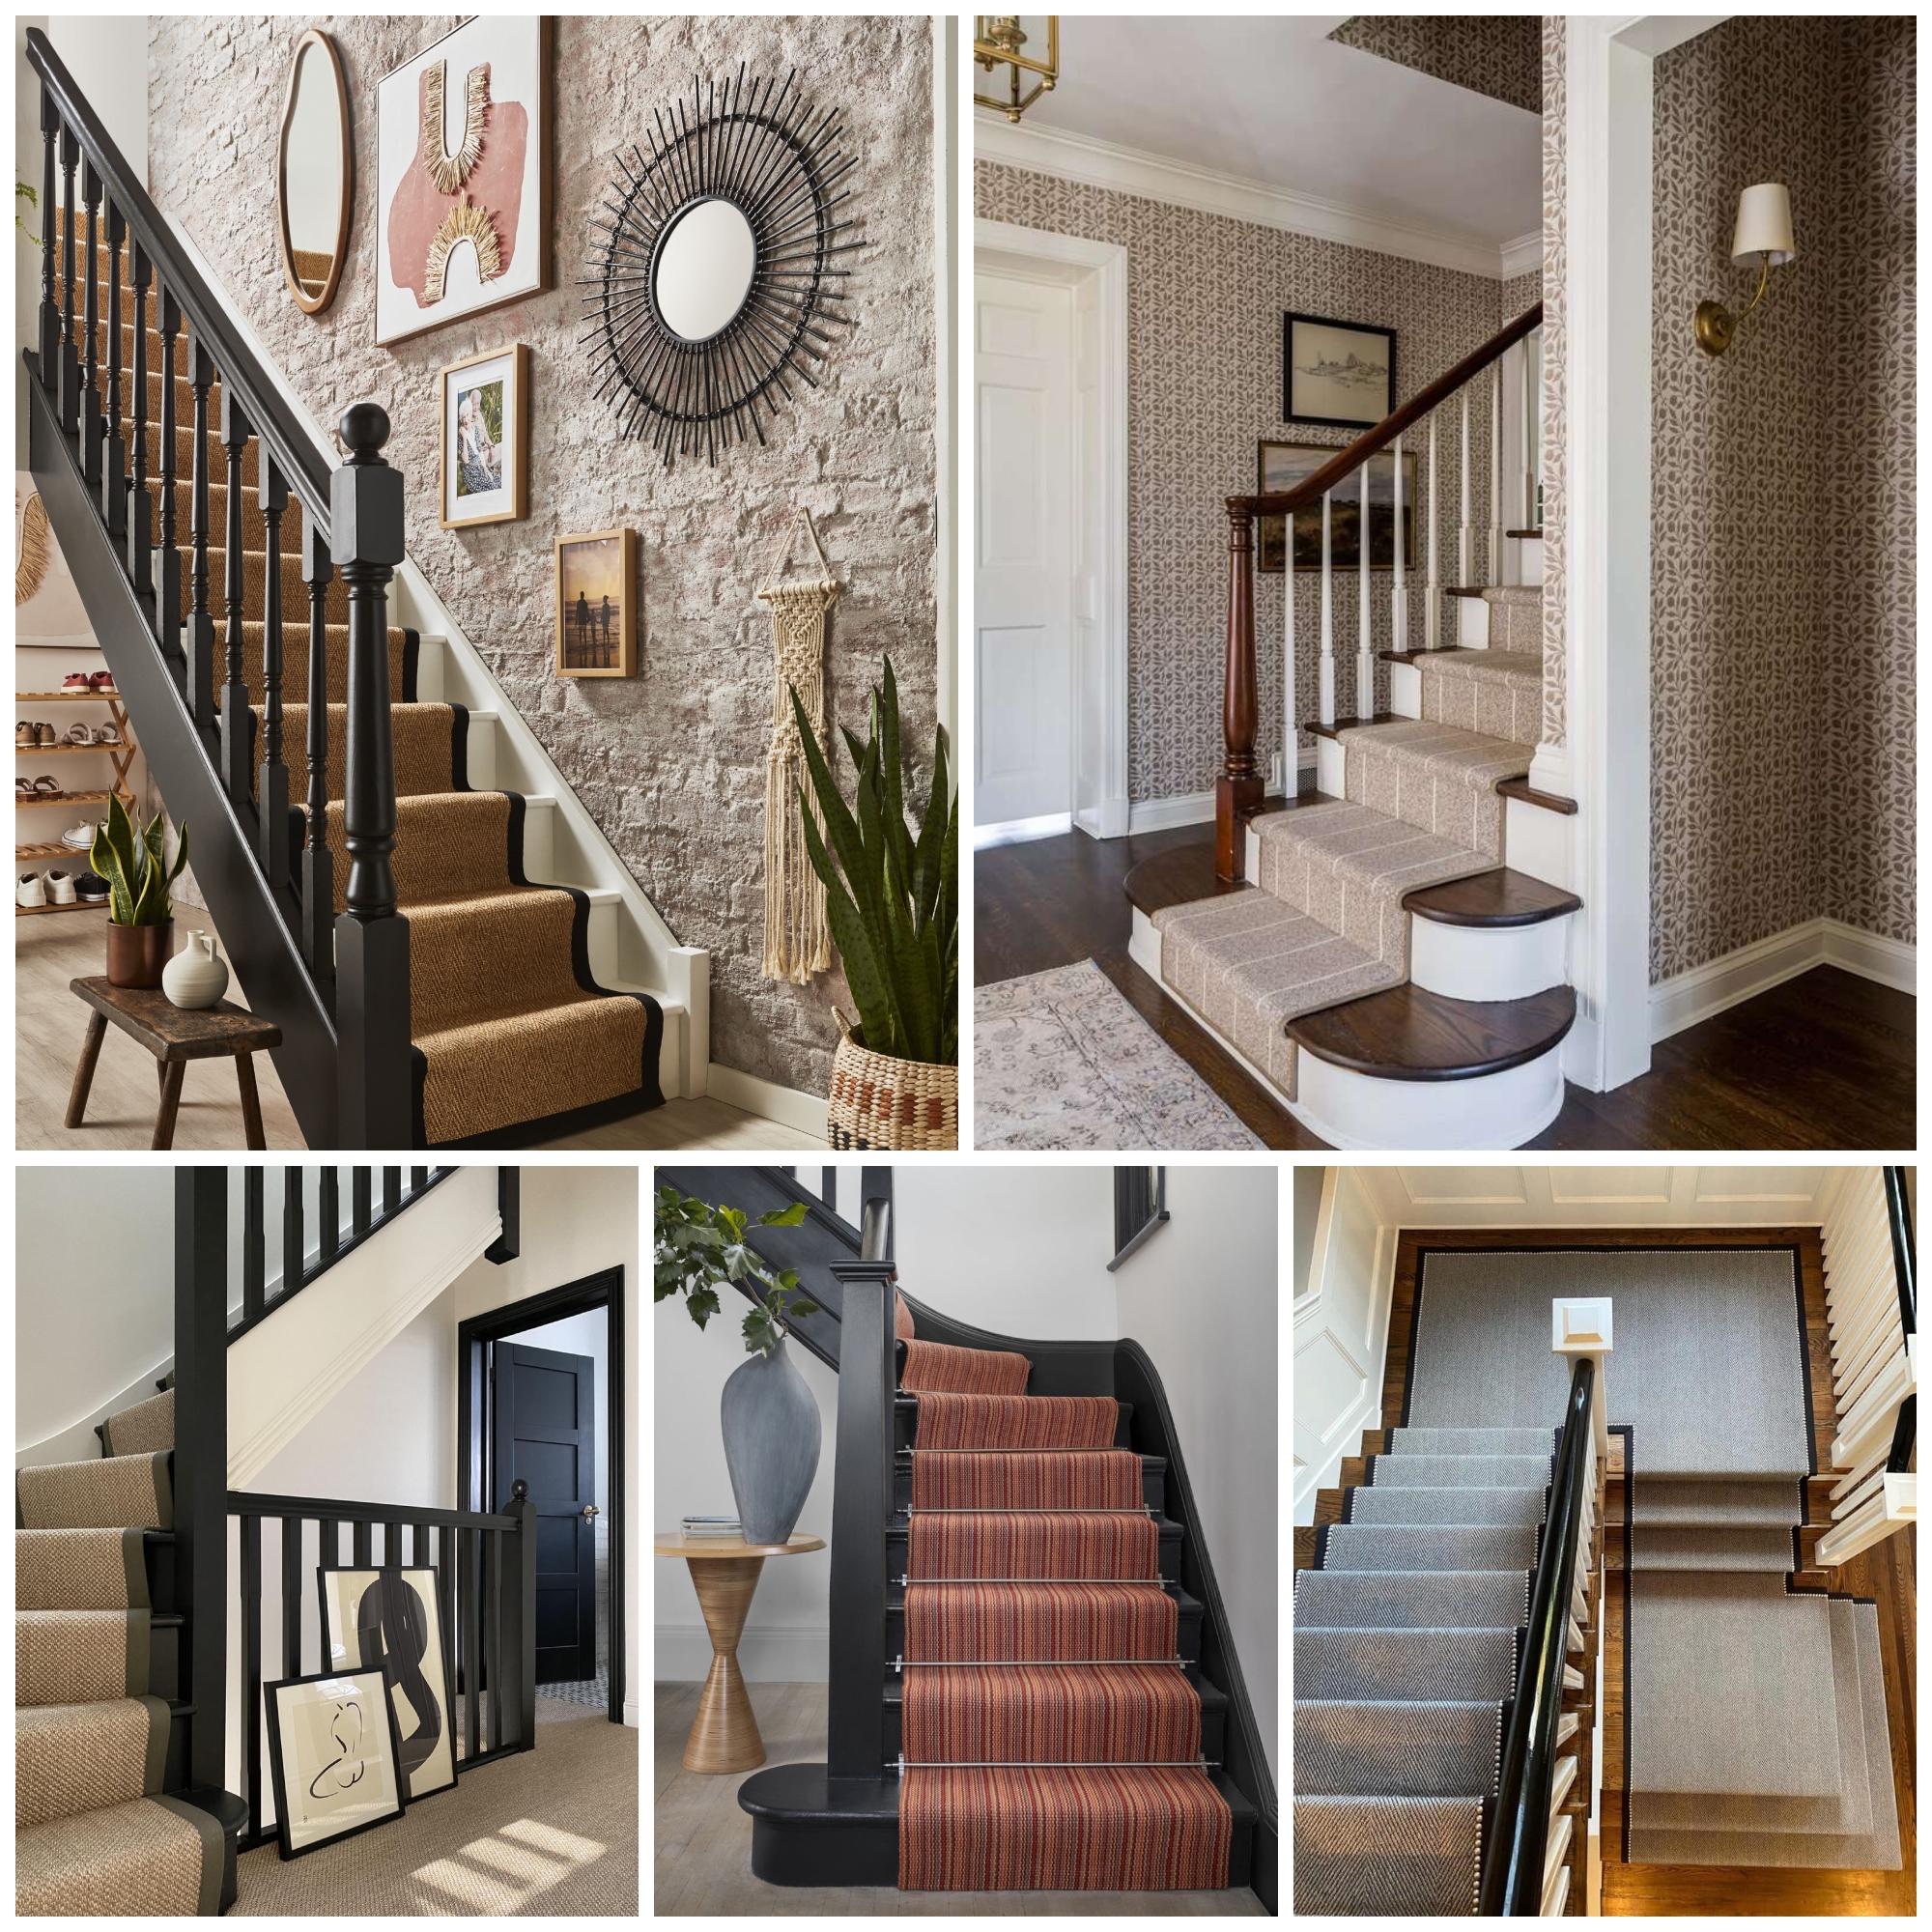 Stair Runner Ideas for a Stylish Home Makeover